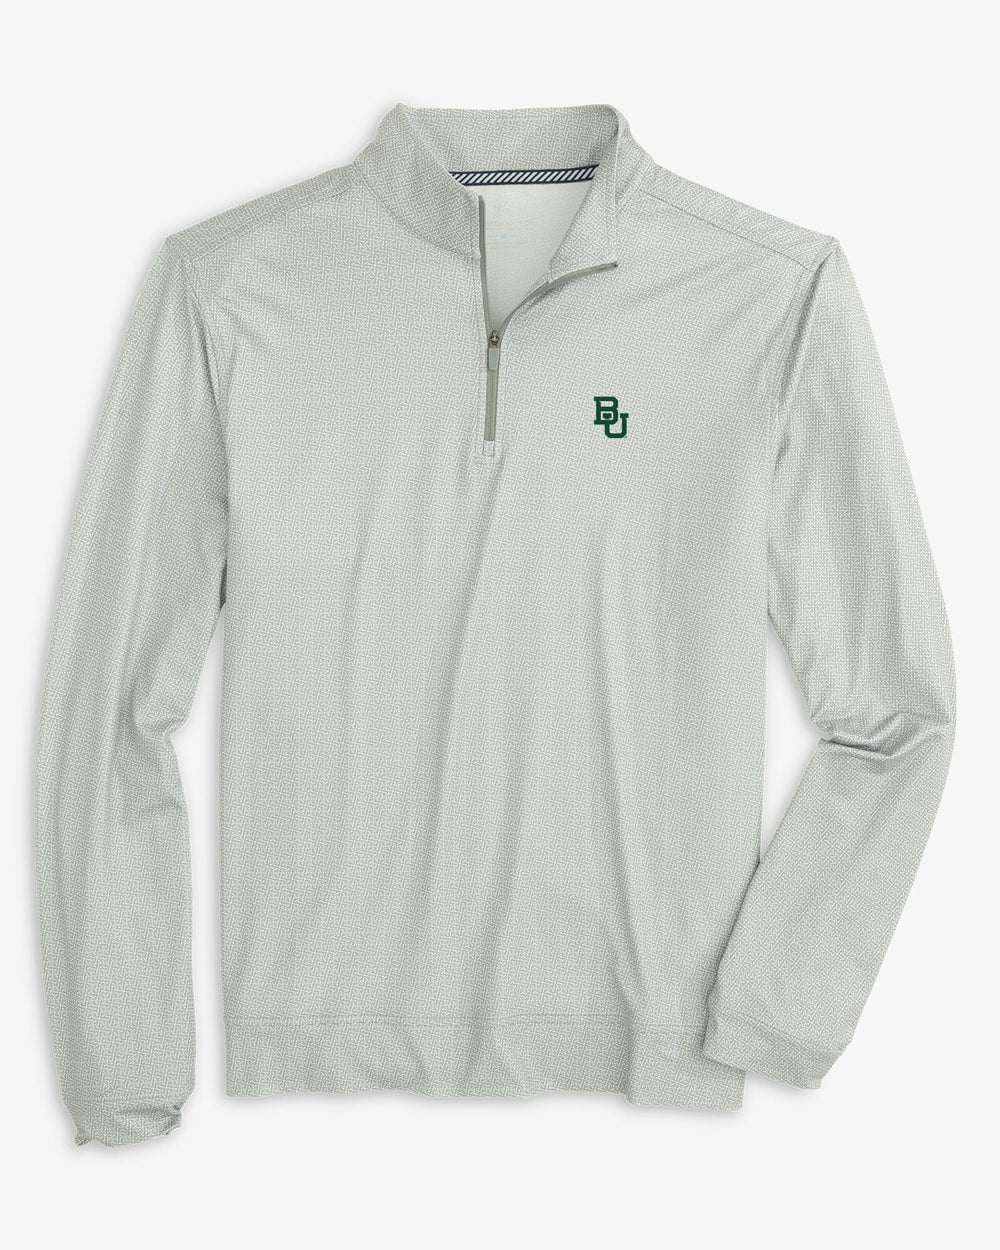 The front view of the Baylor Bears Pine Ridge Print Cruiser Quarter Zip Pullover by Southern Tide - Steel Grey